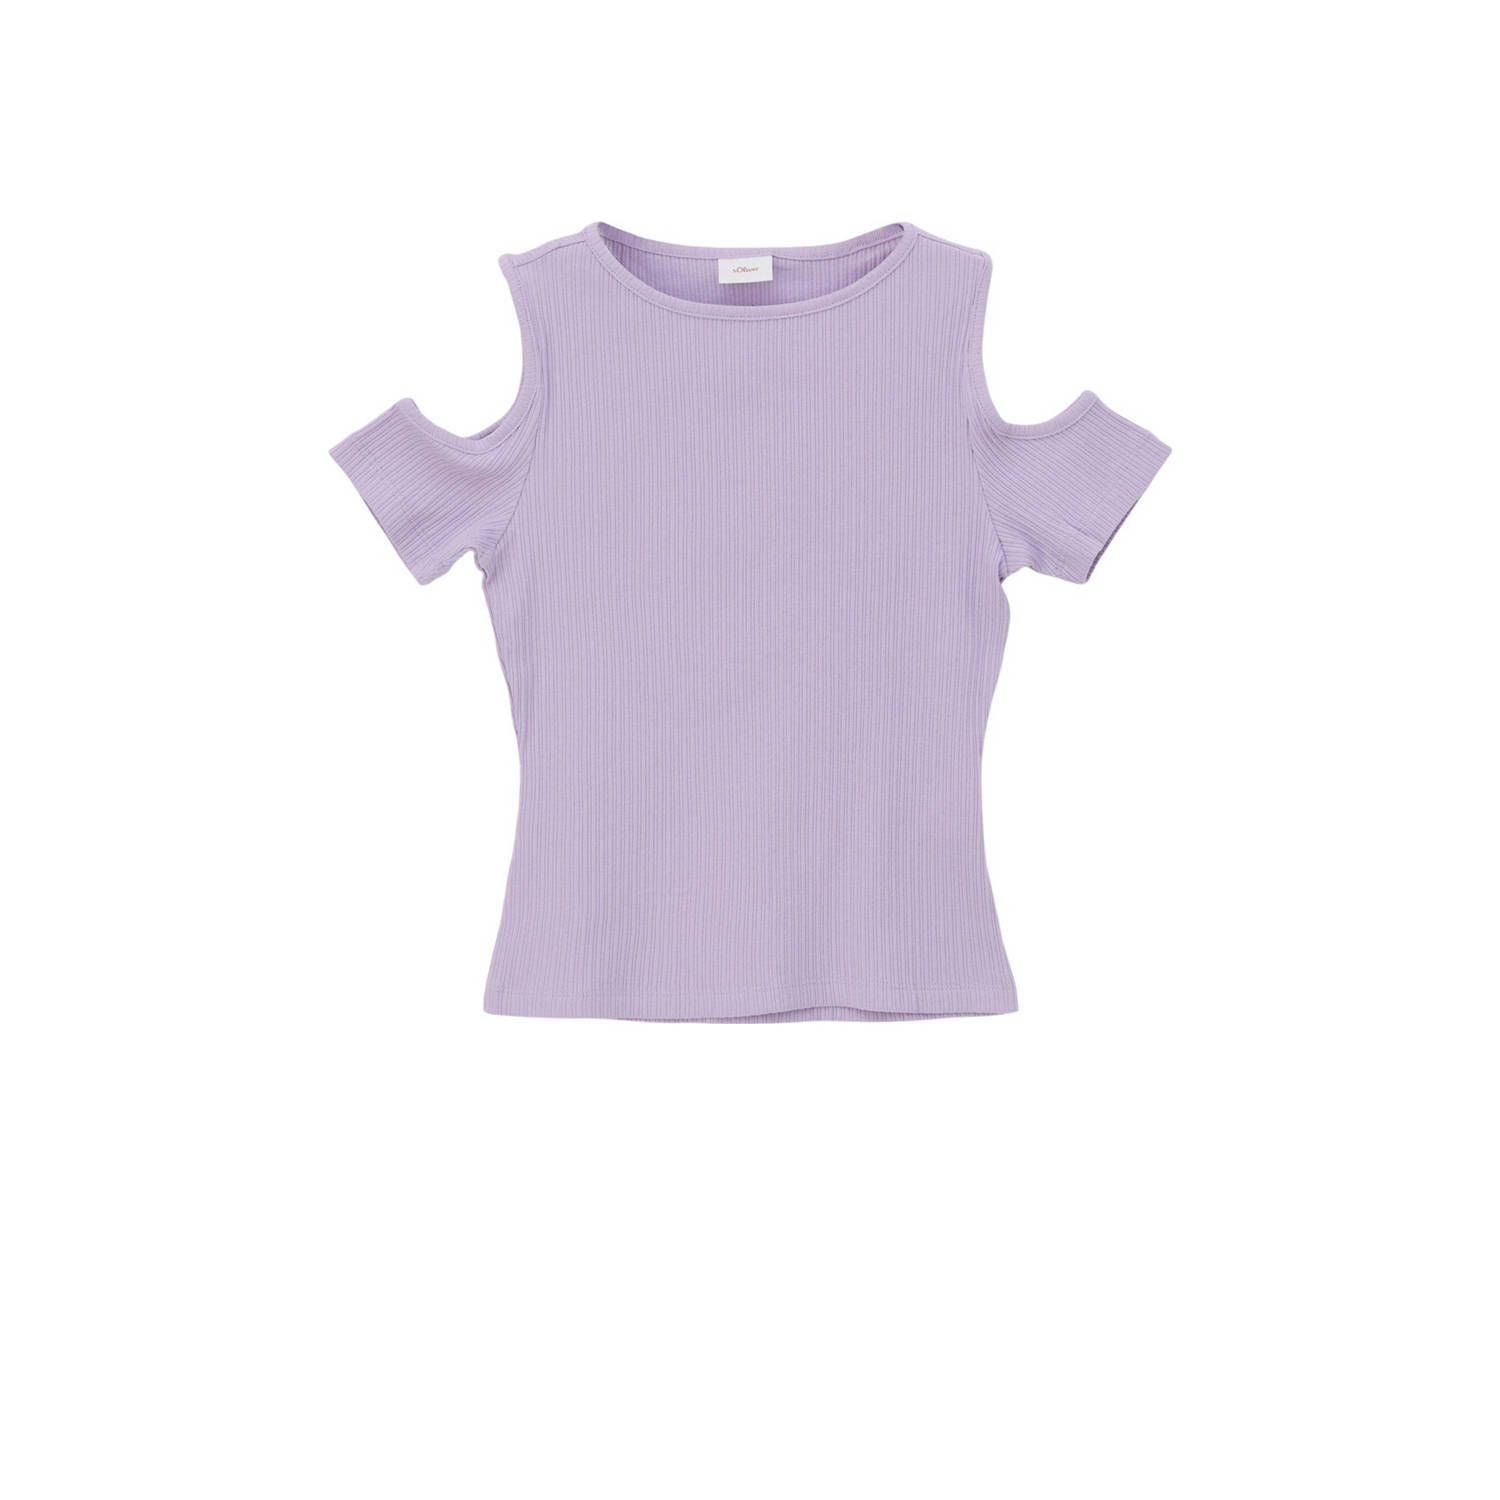 s.Oliver T-shirt lila